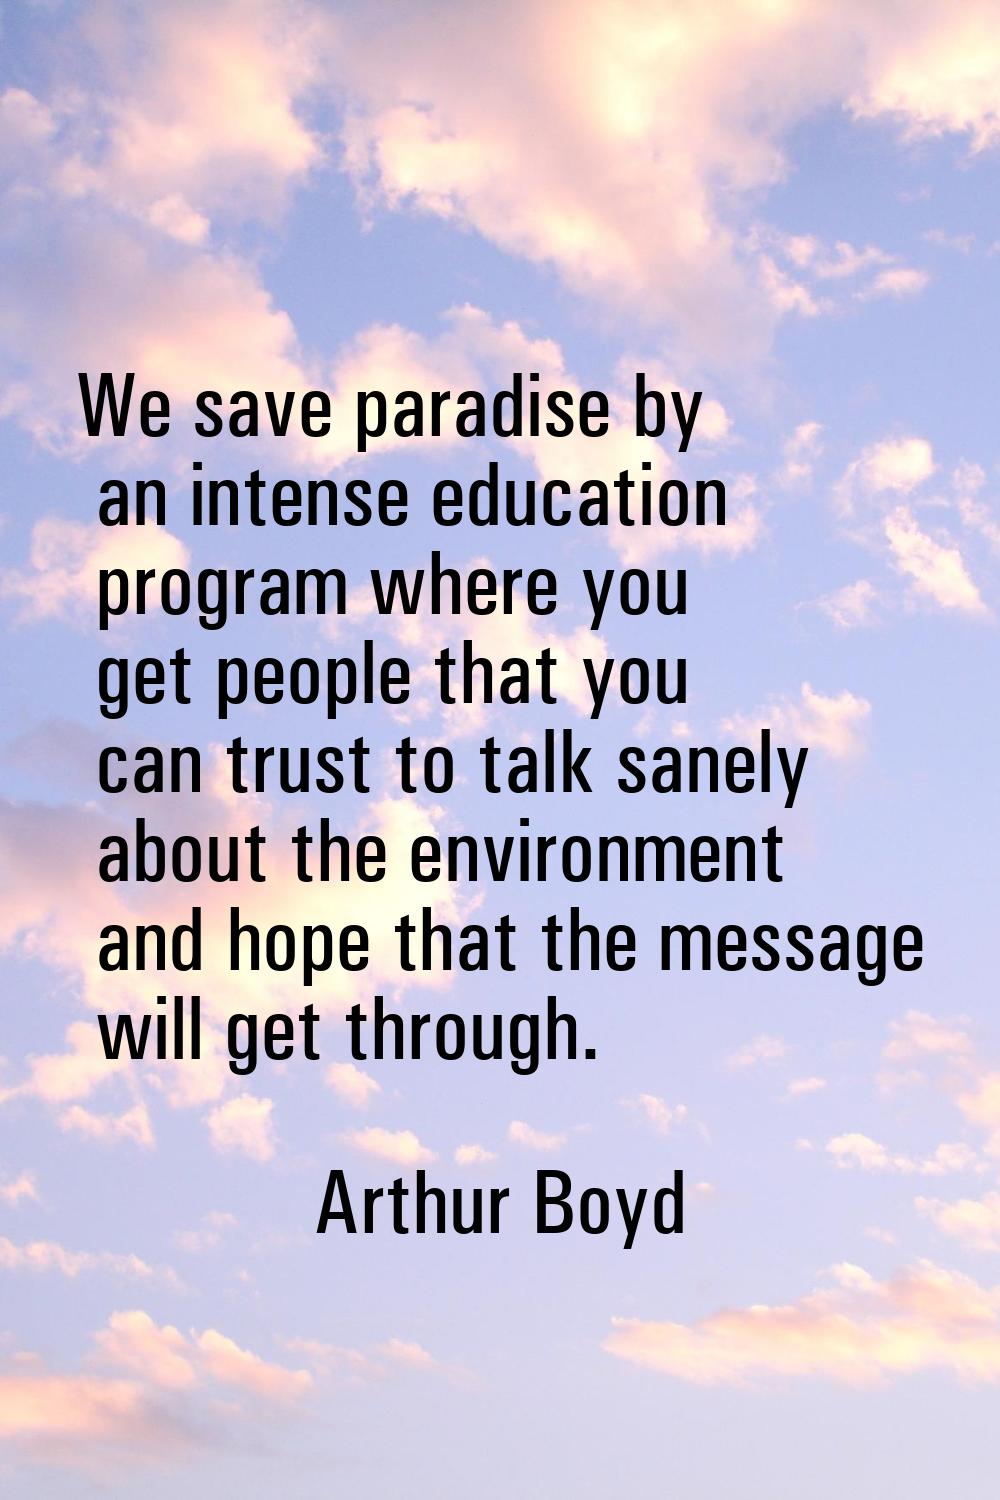 We save paradise by an intense education program where you get people that you can trust to talk sa